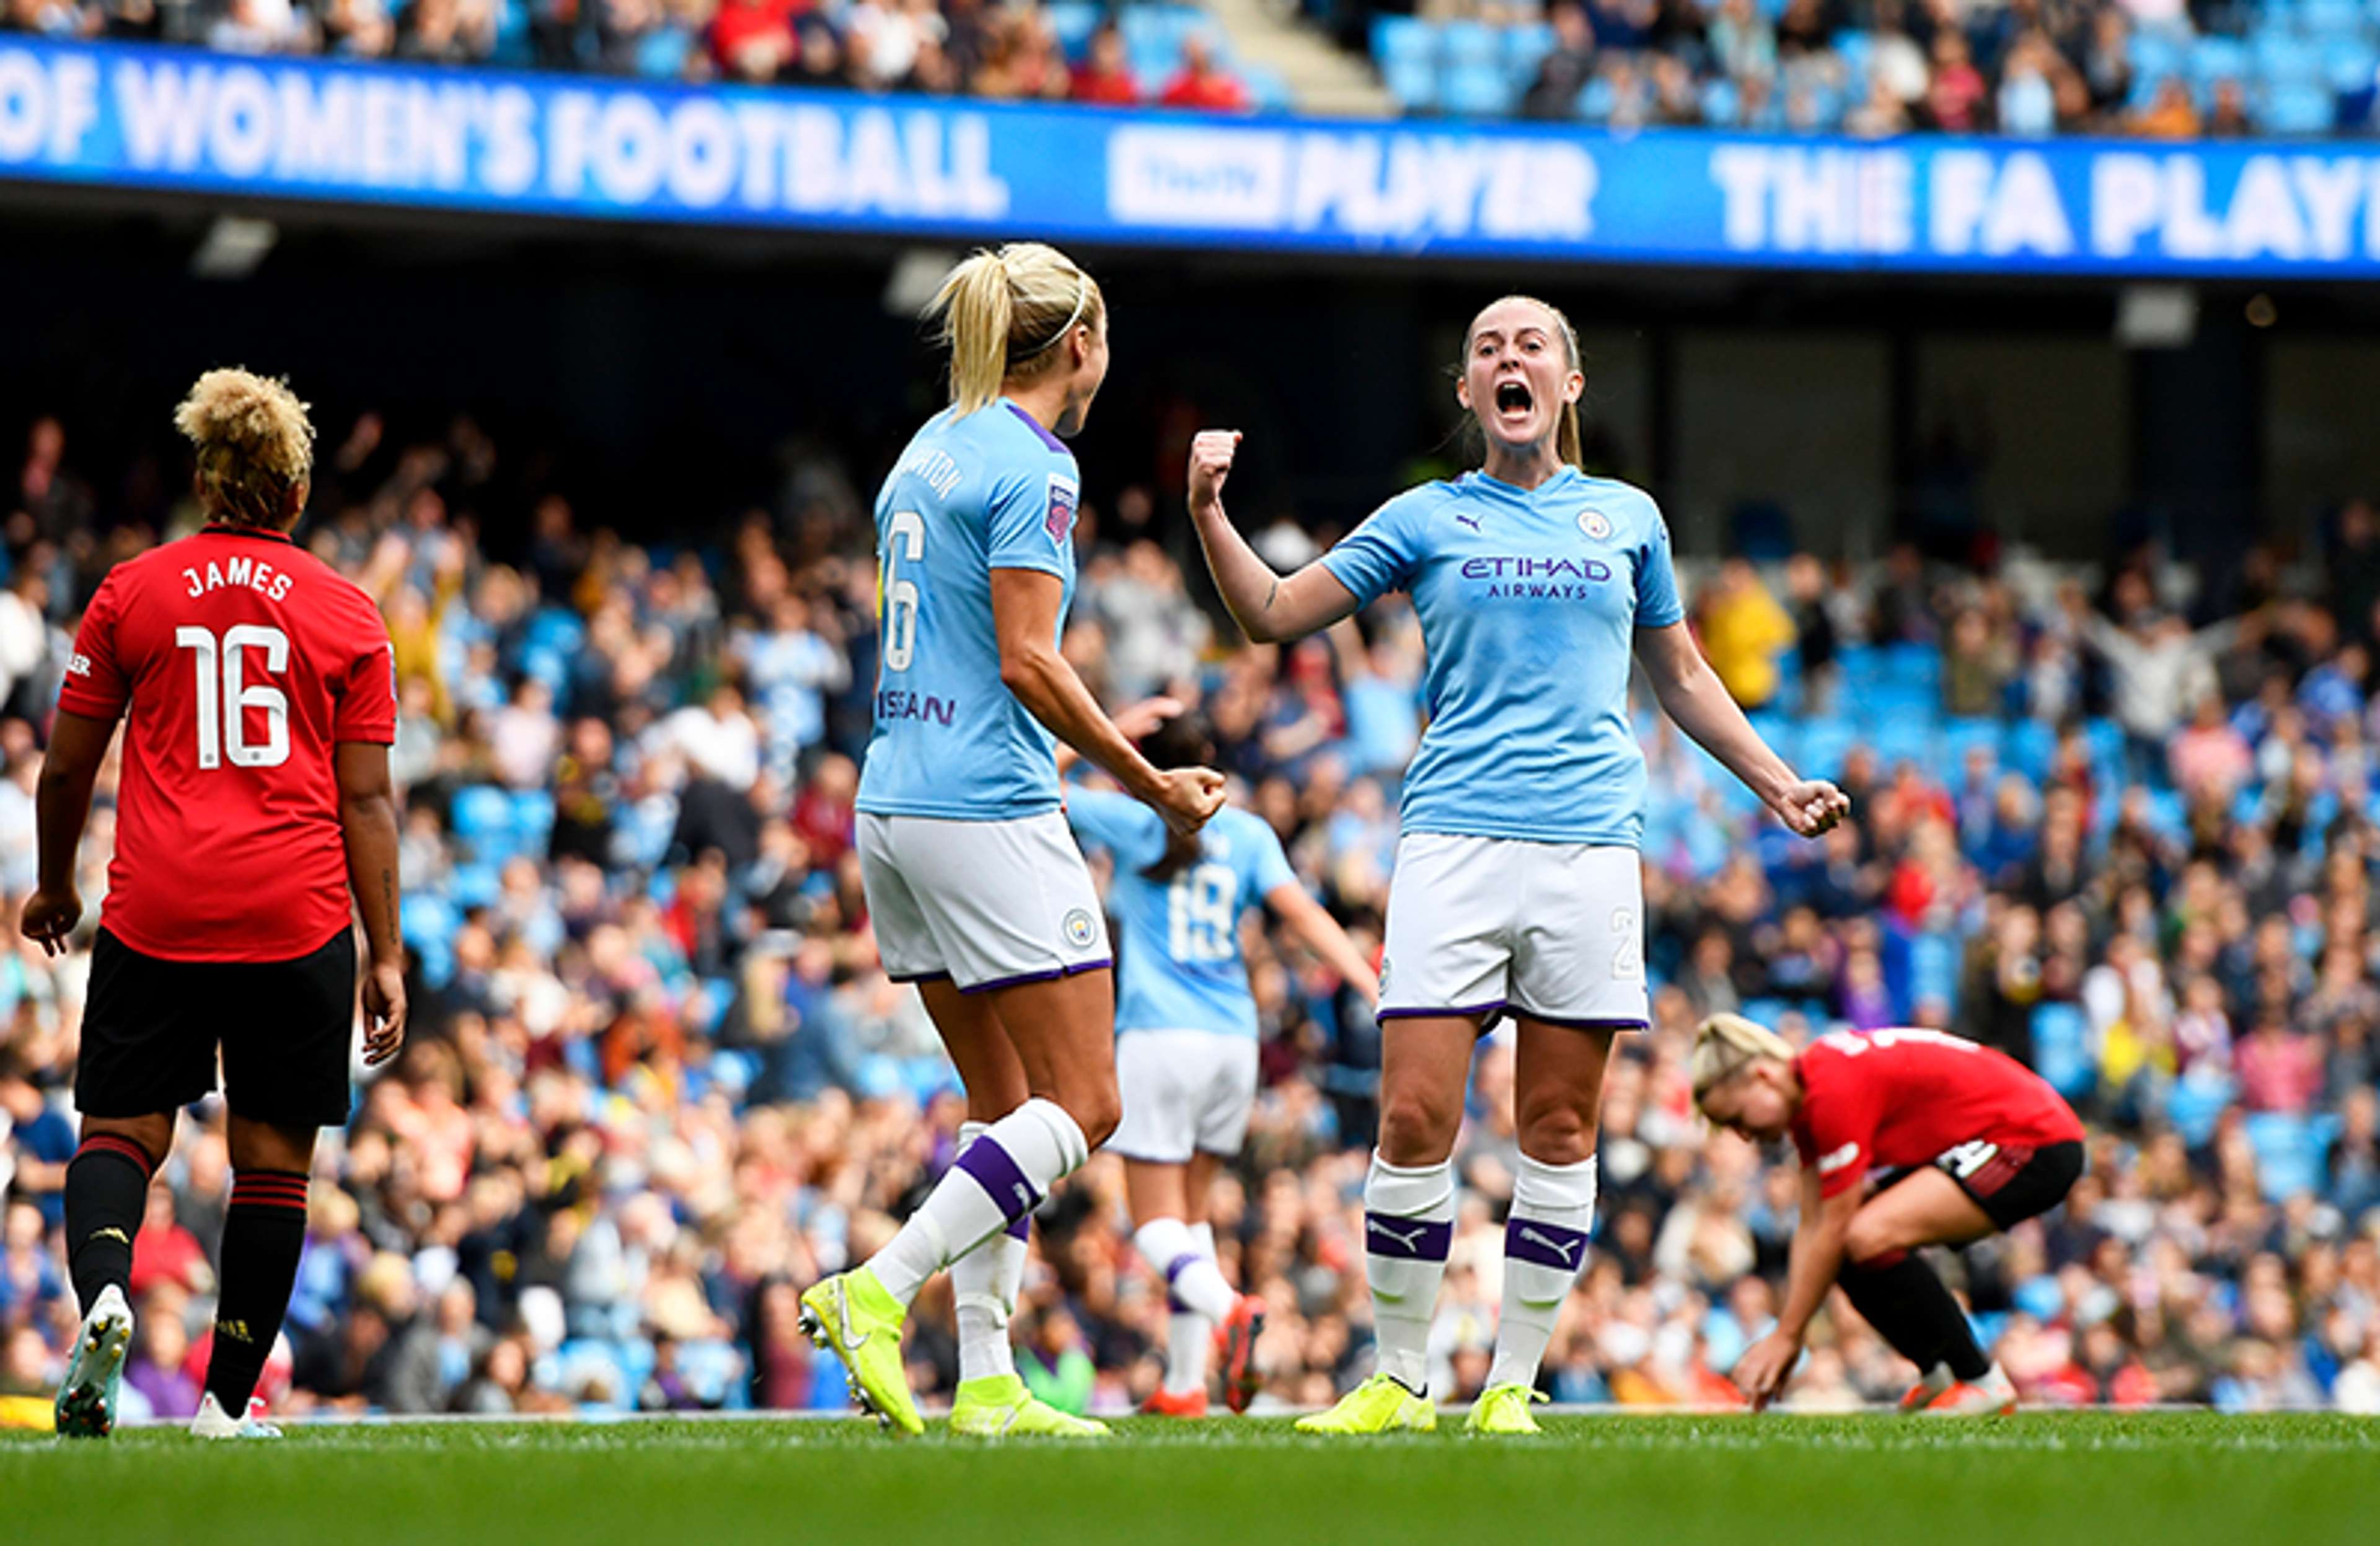 Keira Walsh Steph Houghton Manchester City Women 2019